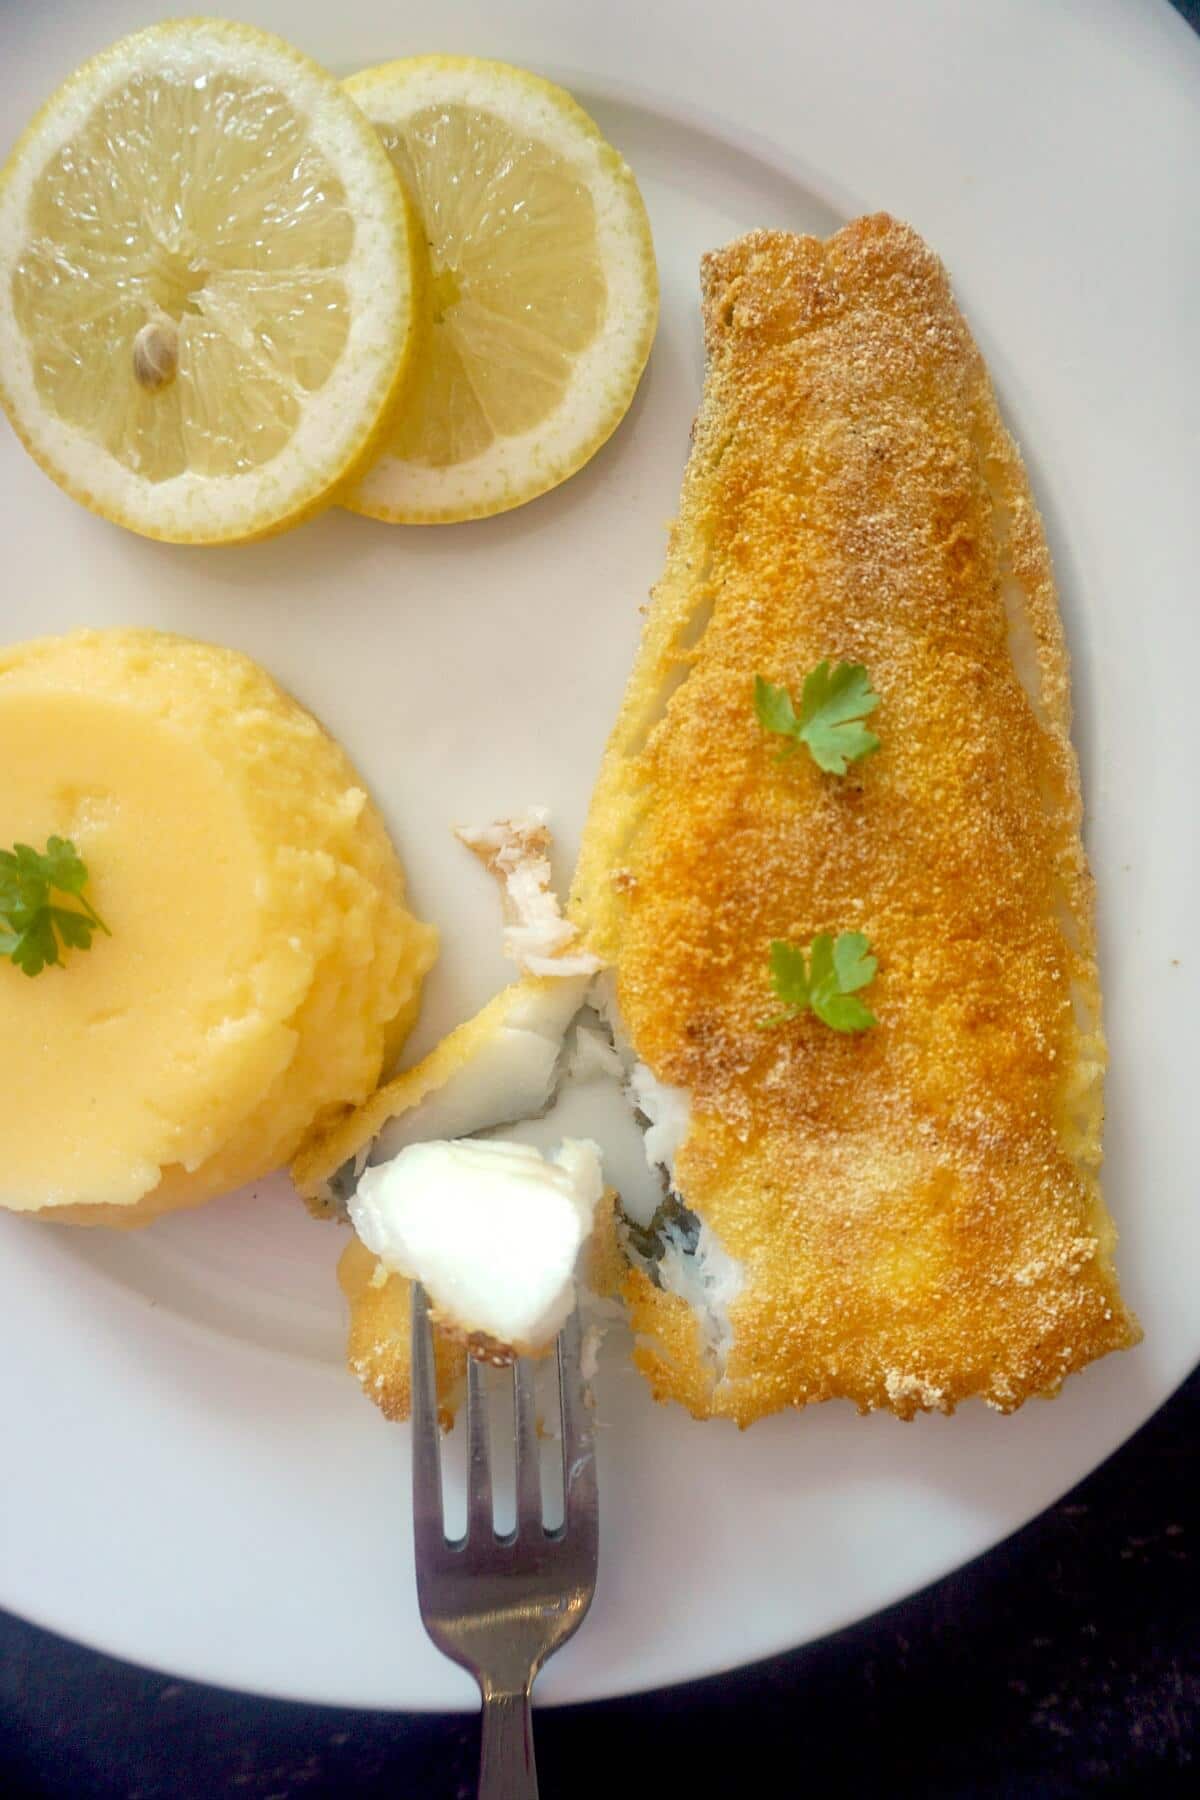 Overhead shoot of a cornmeal-crusted fried fish, 2 slices of lemon and polenta on a white plate.